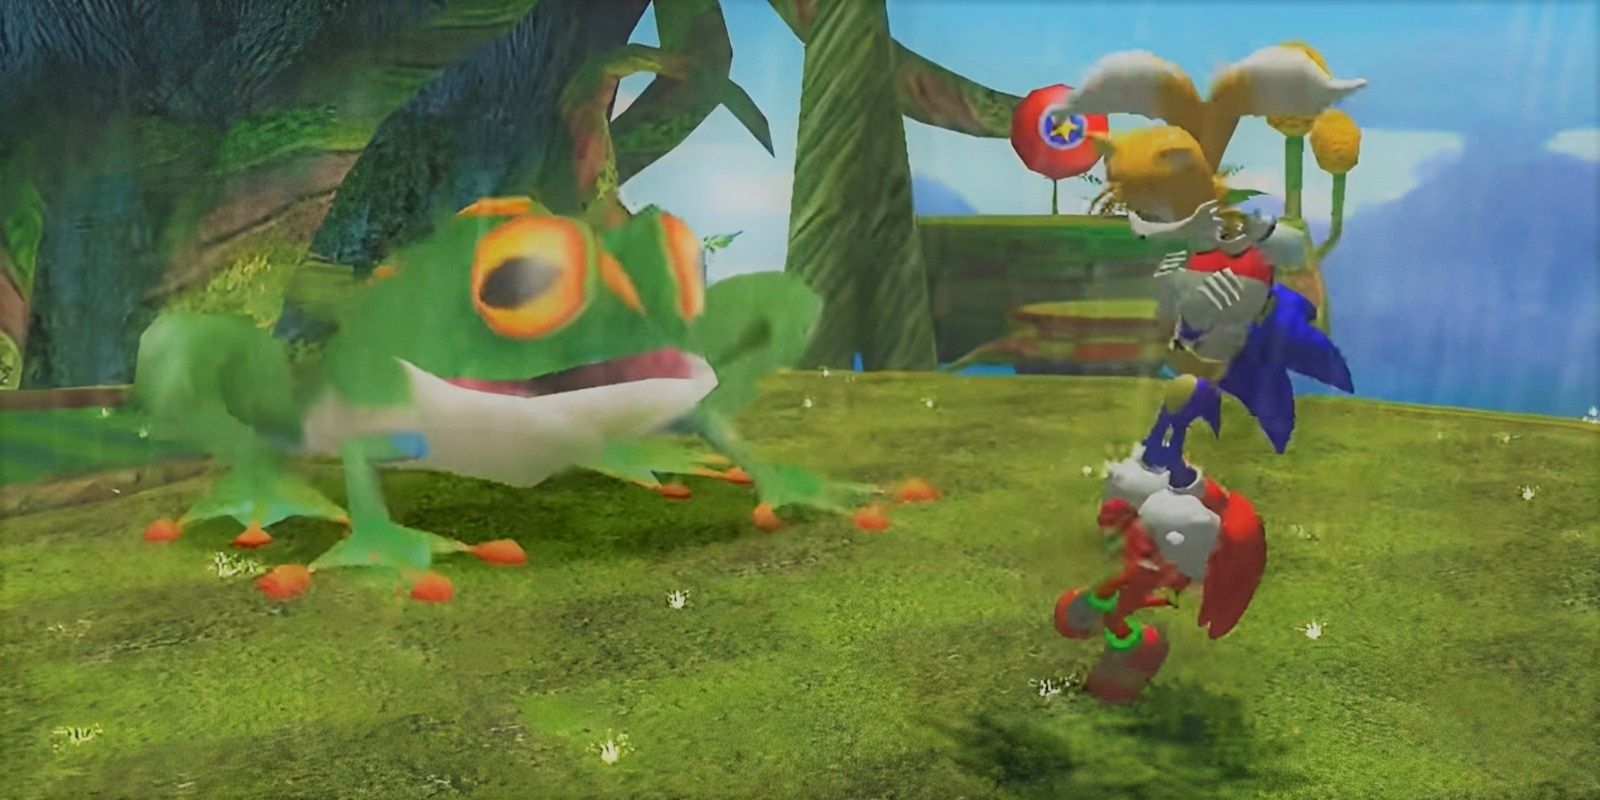 Tails, Sonic, and Knuckles next to a frog in Frog Forest